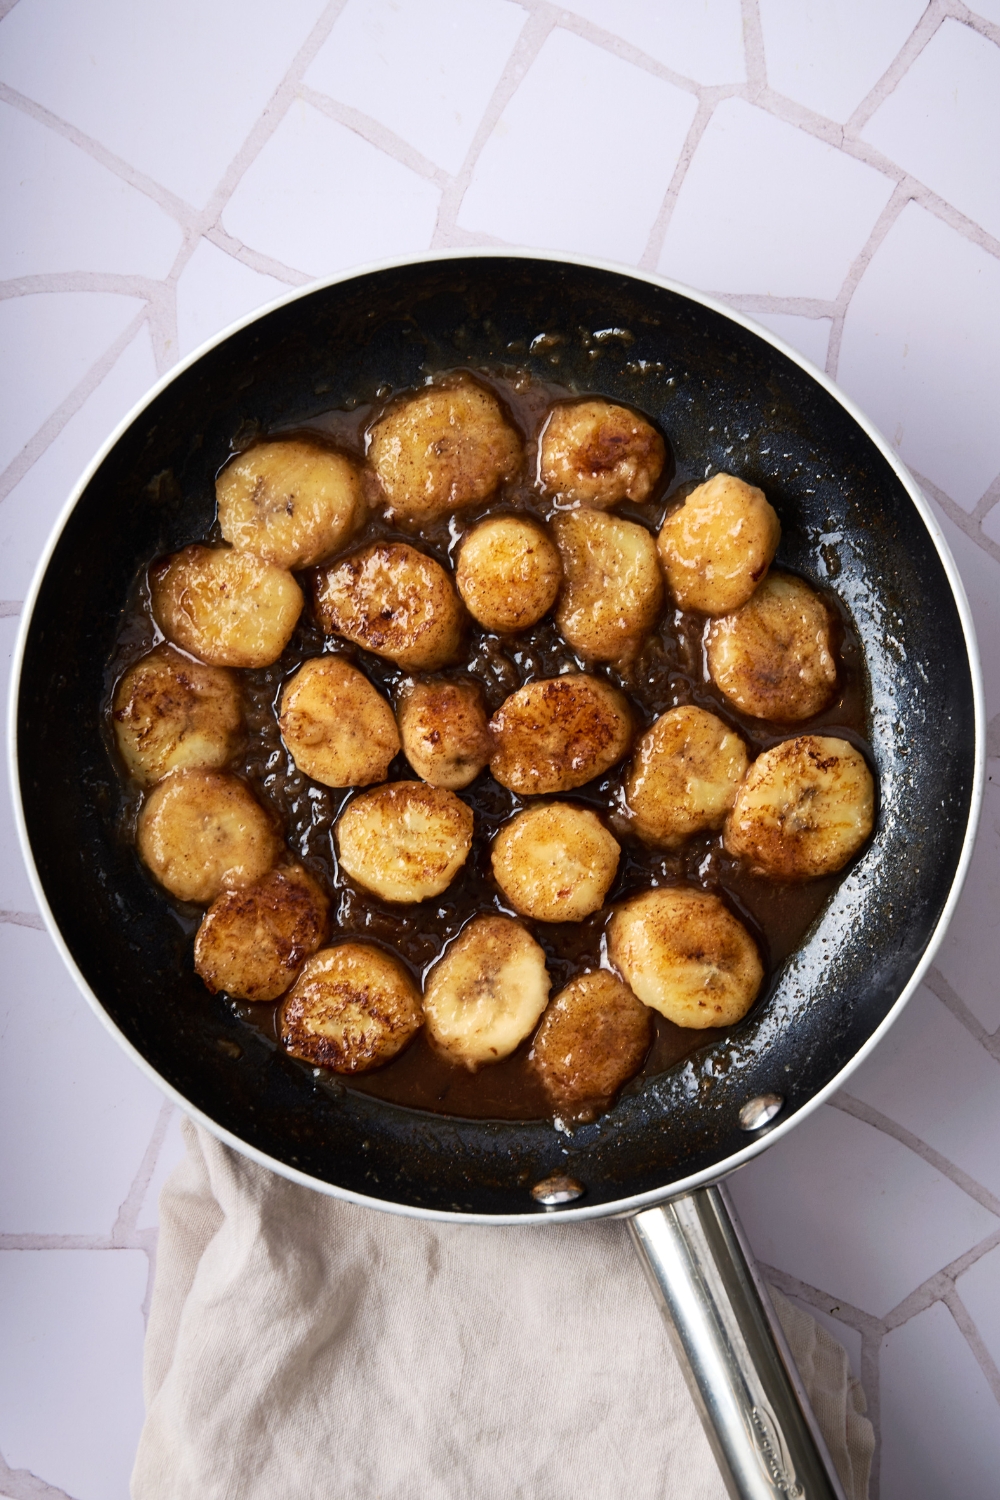 A frying pan with the cooked banana slices and honey mixture poured over it.